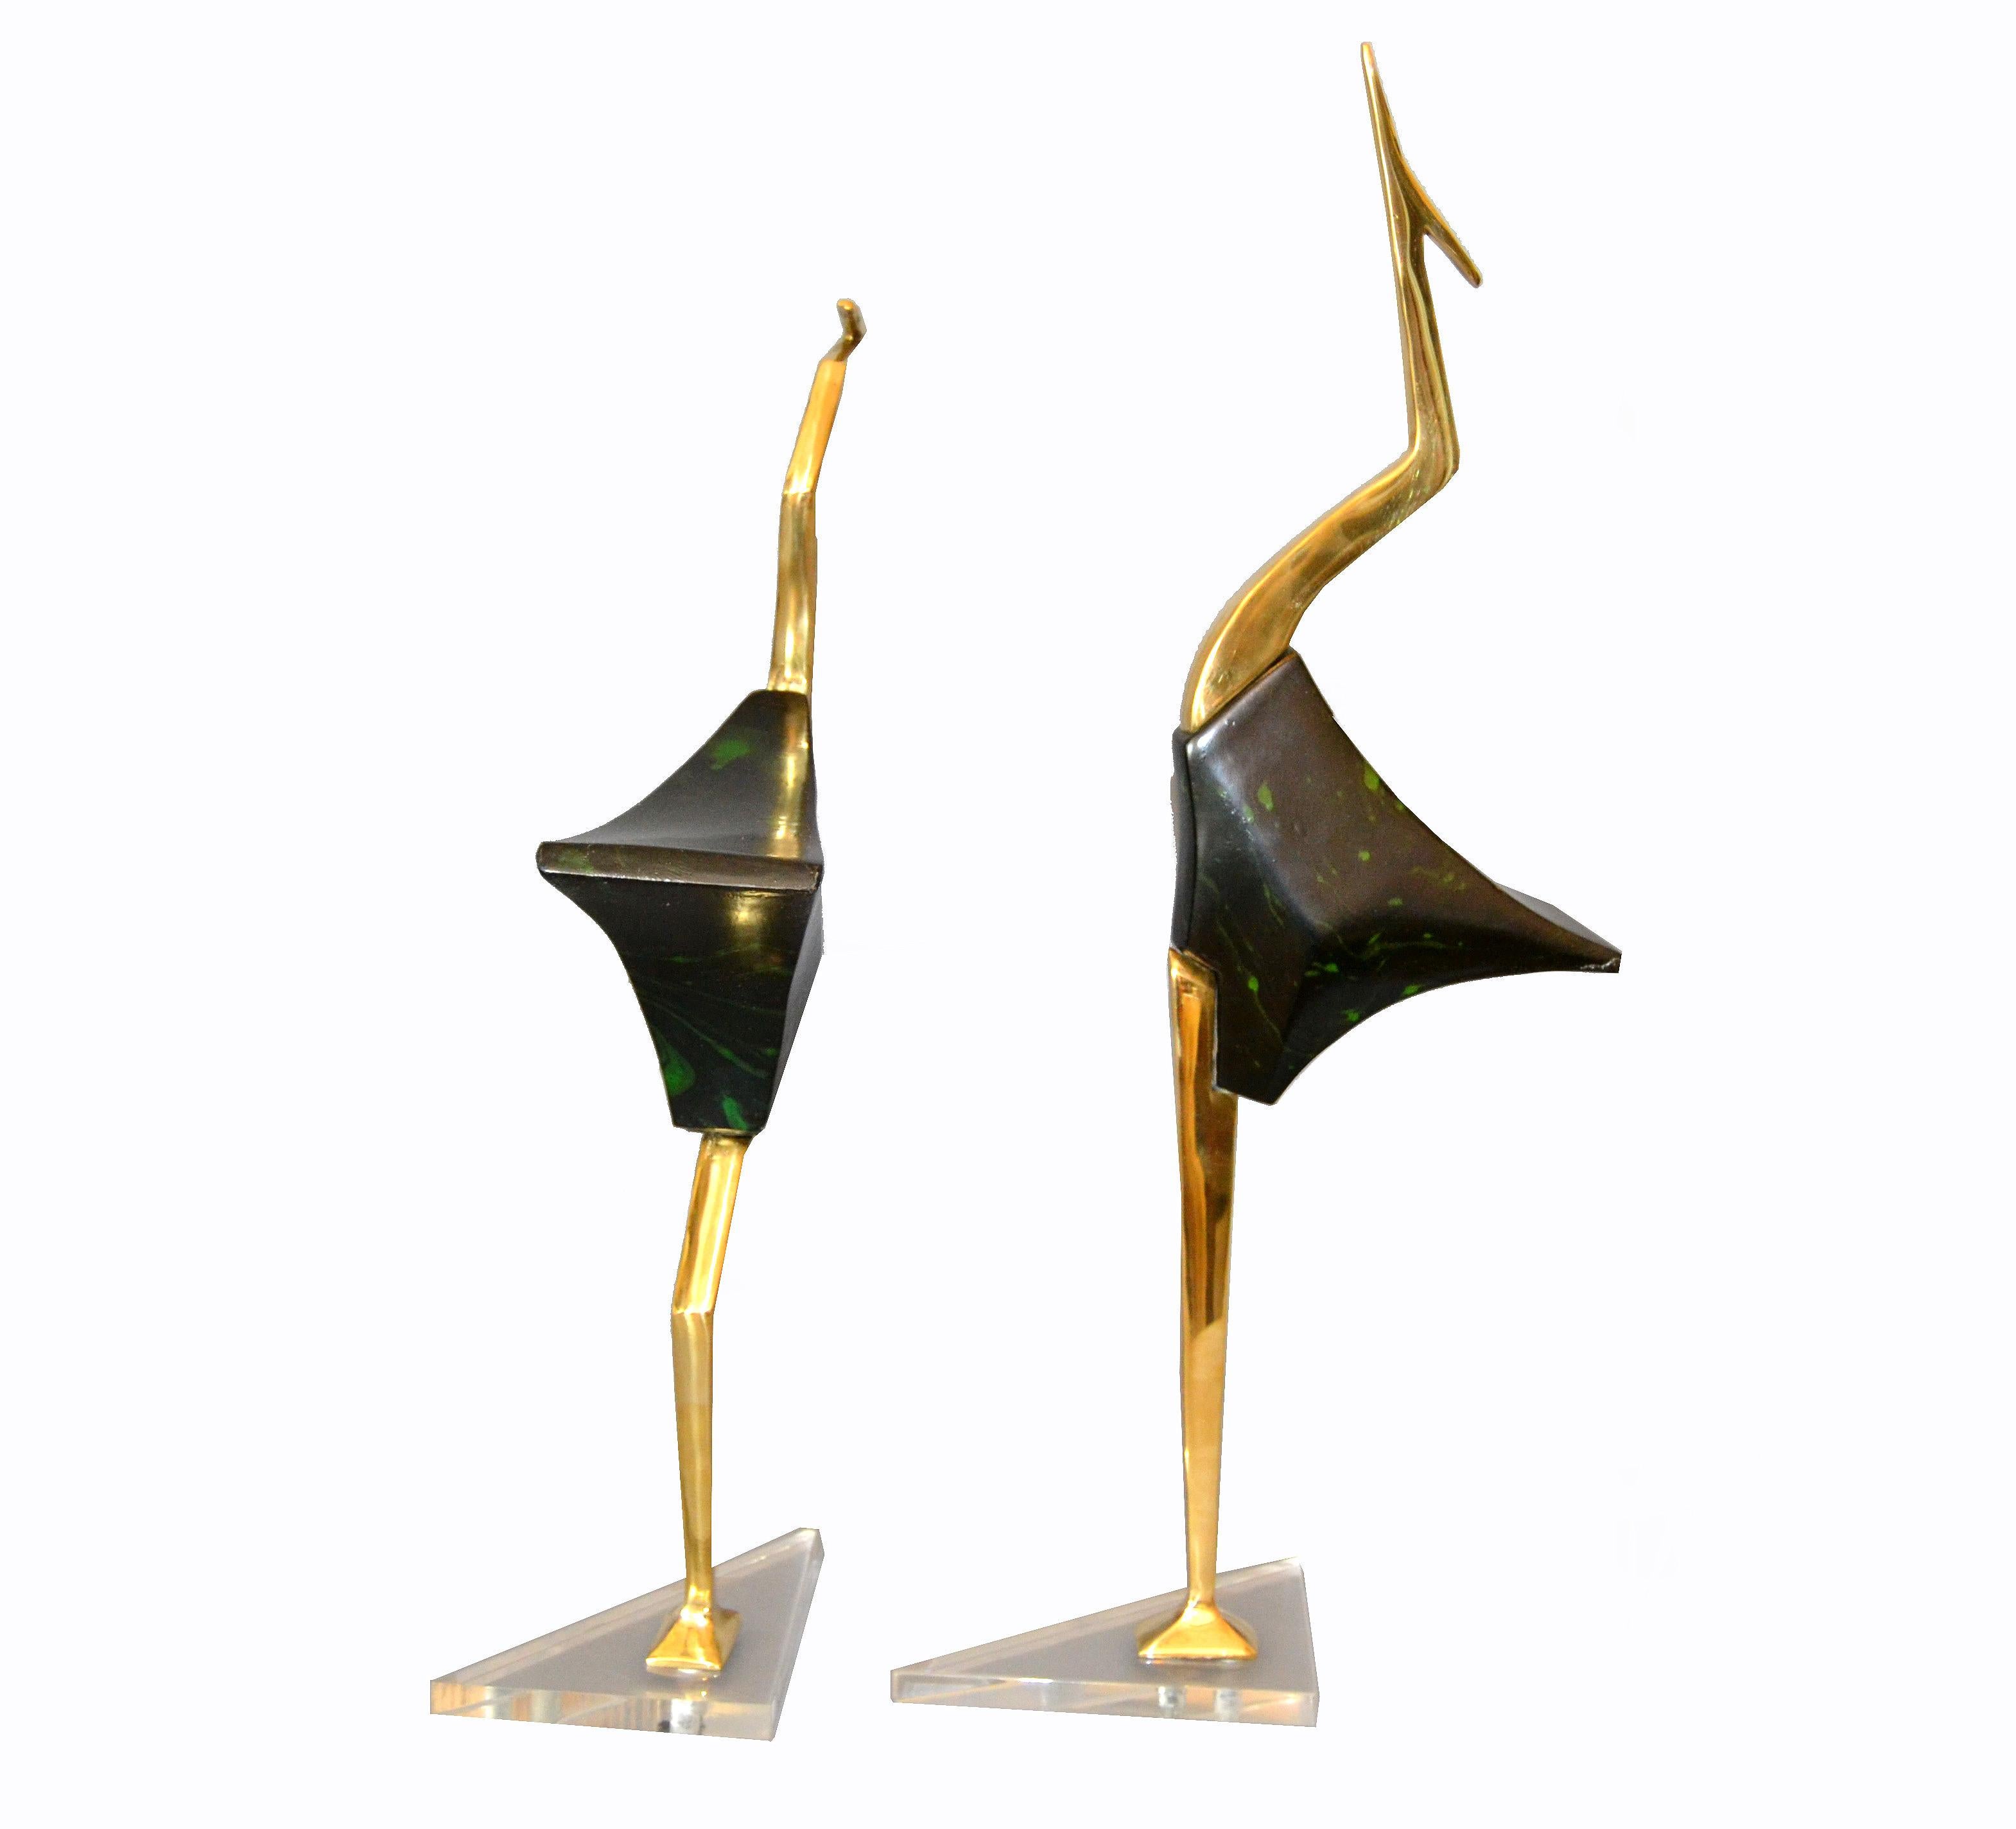 American Stylized Brass and Wood Crane Sculptures on Lucite Base, a Pair For Sale